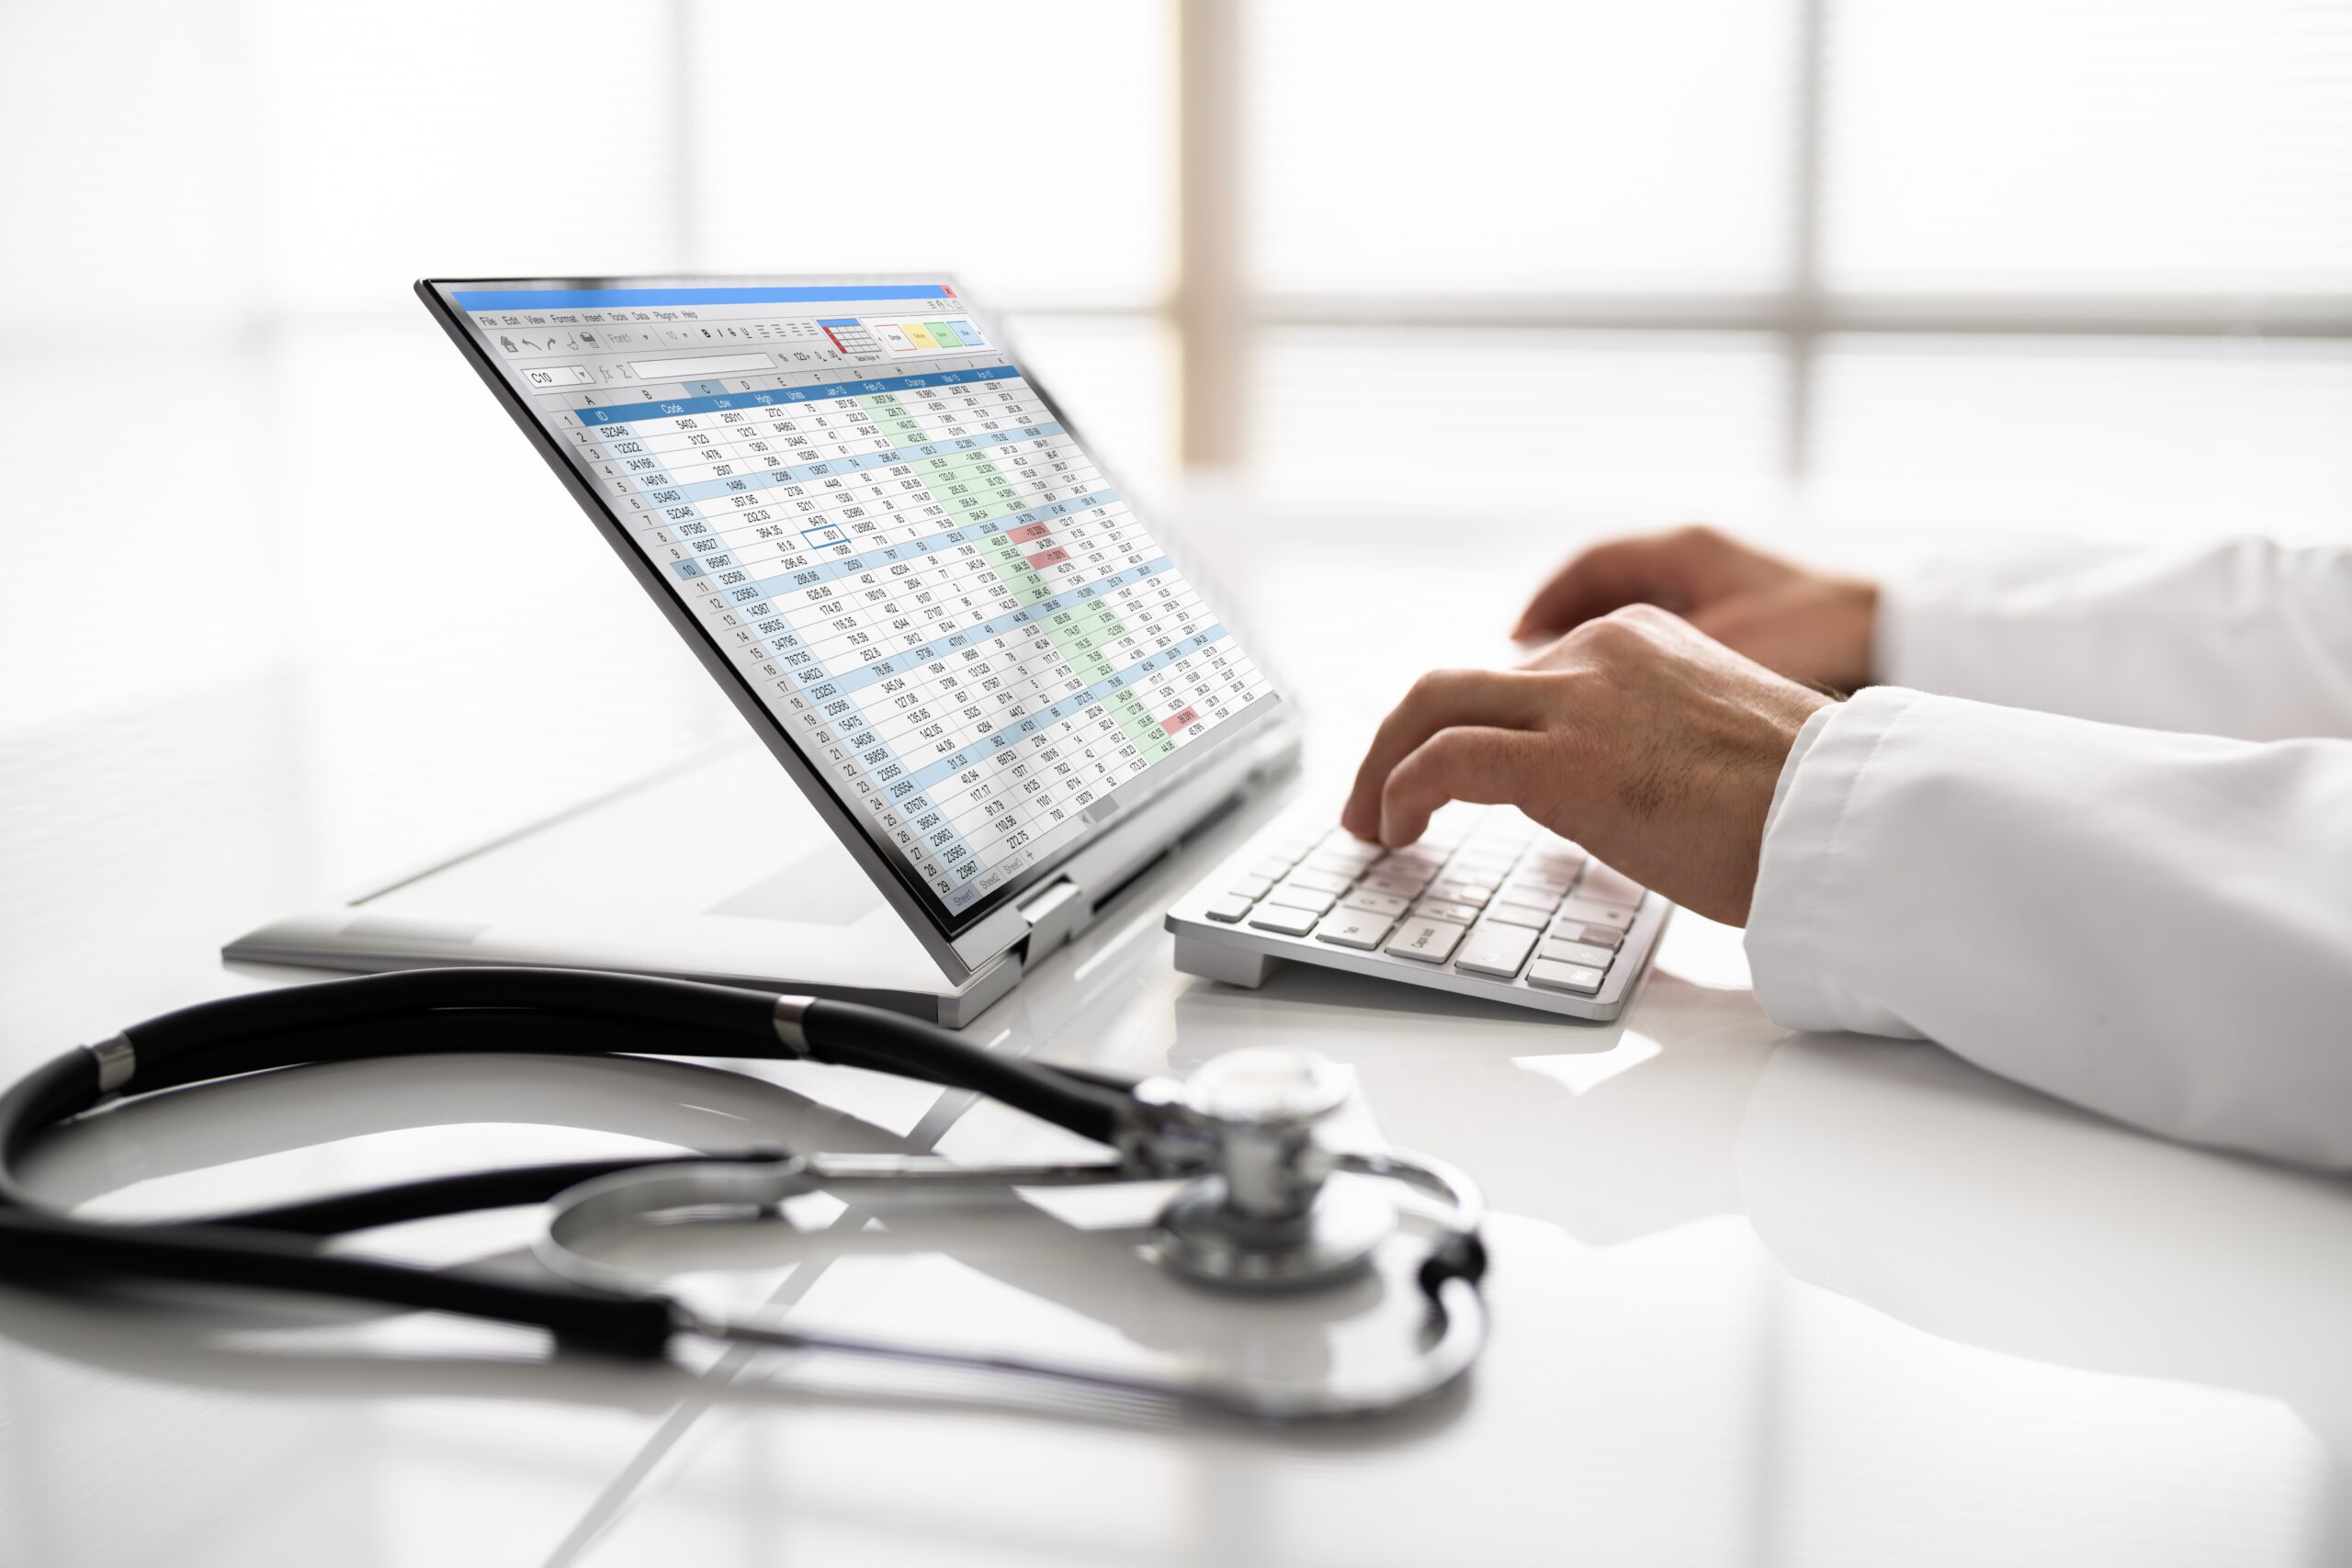 Full Revenue Cycle Management for healthcare providers